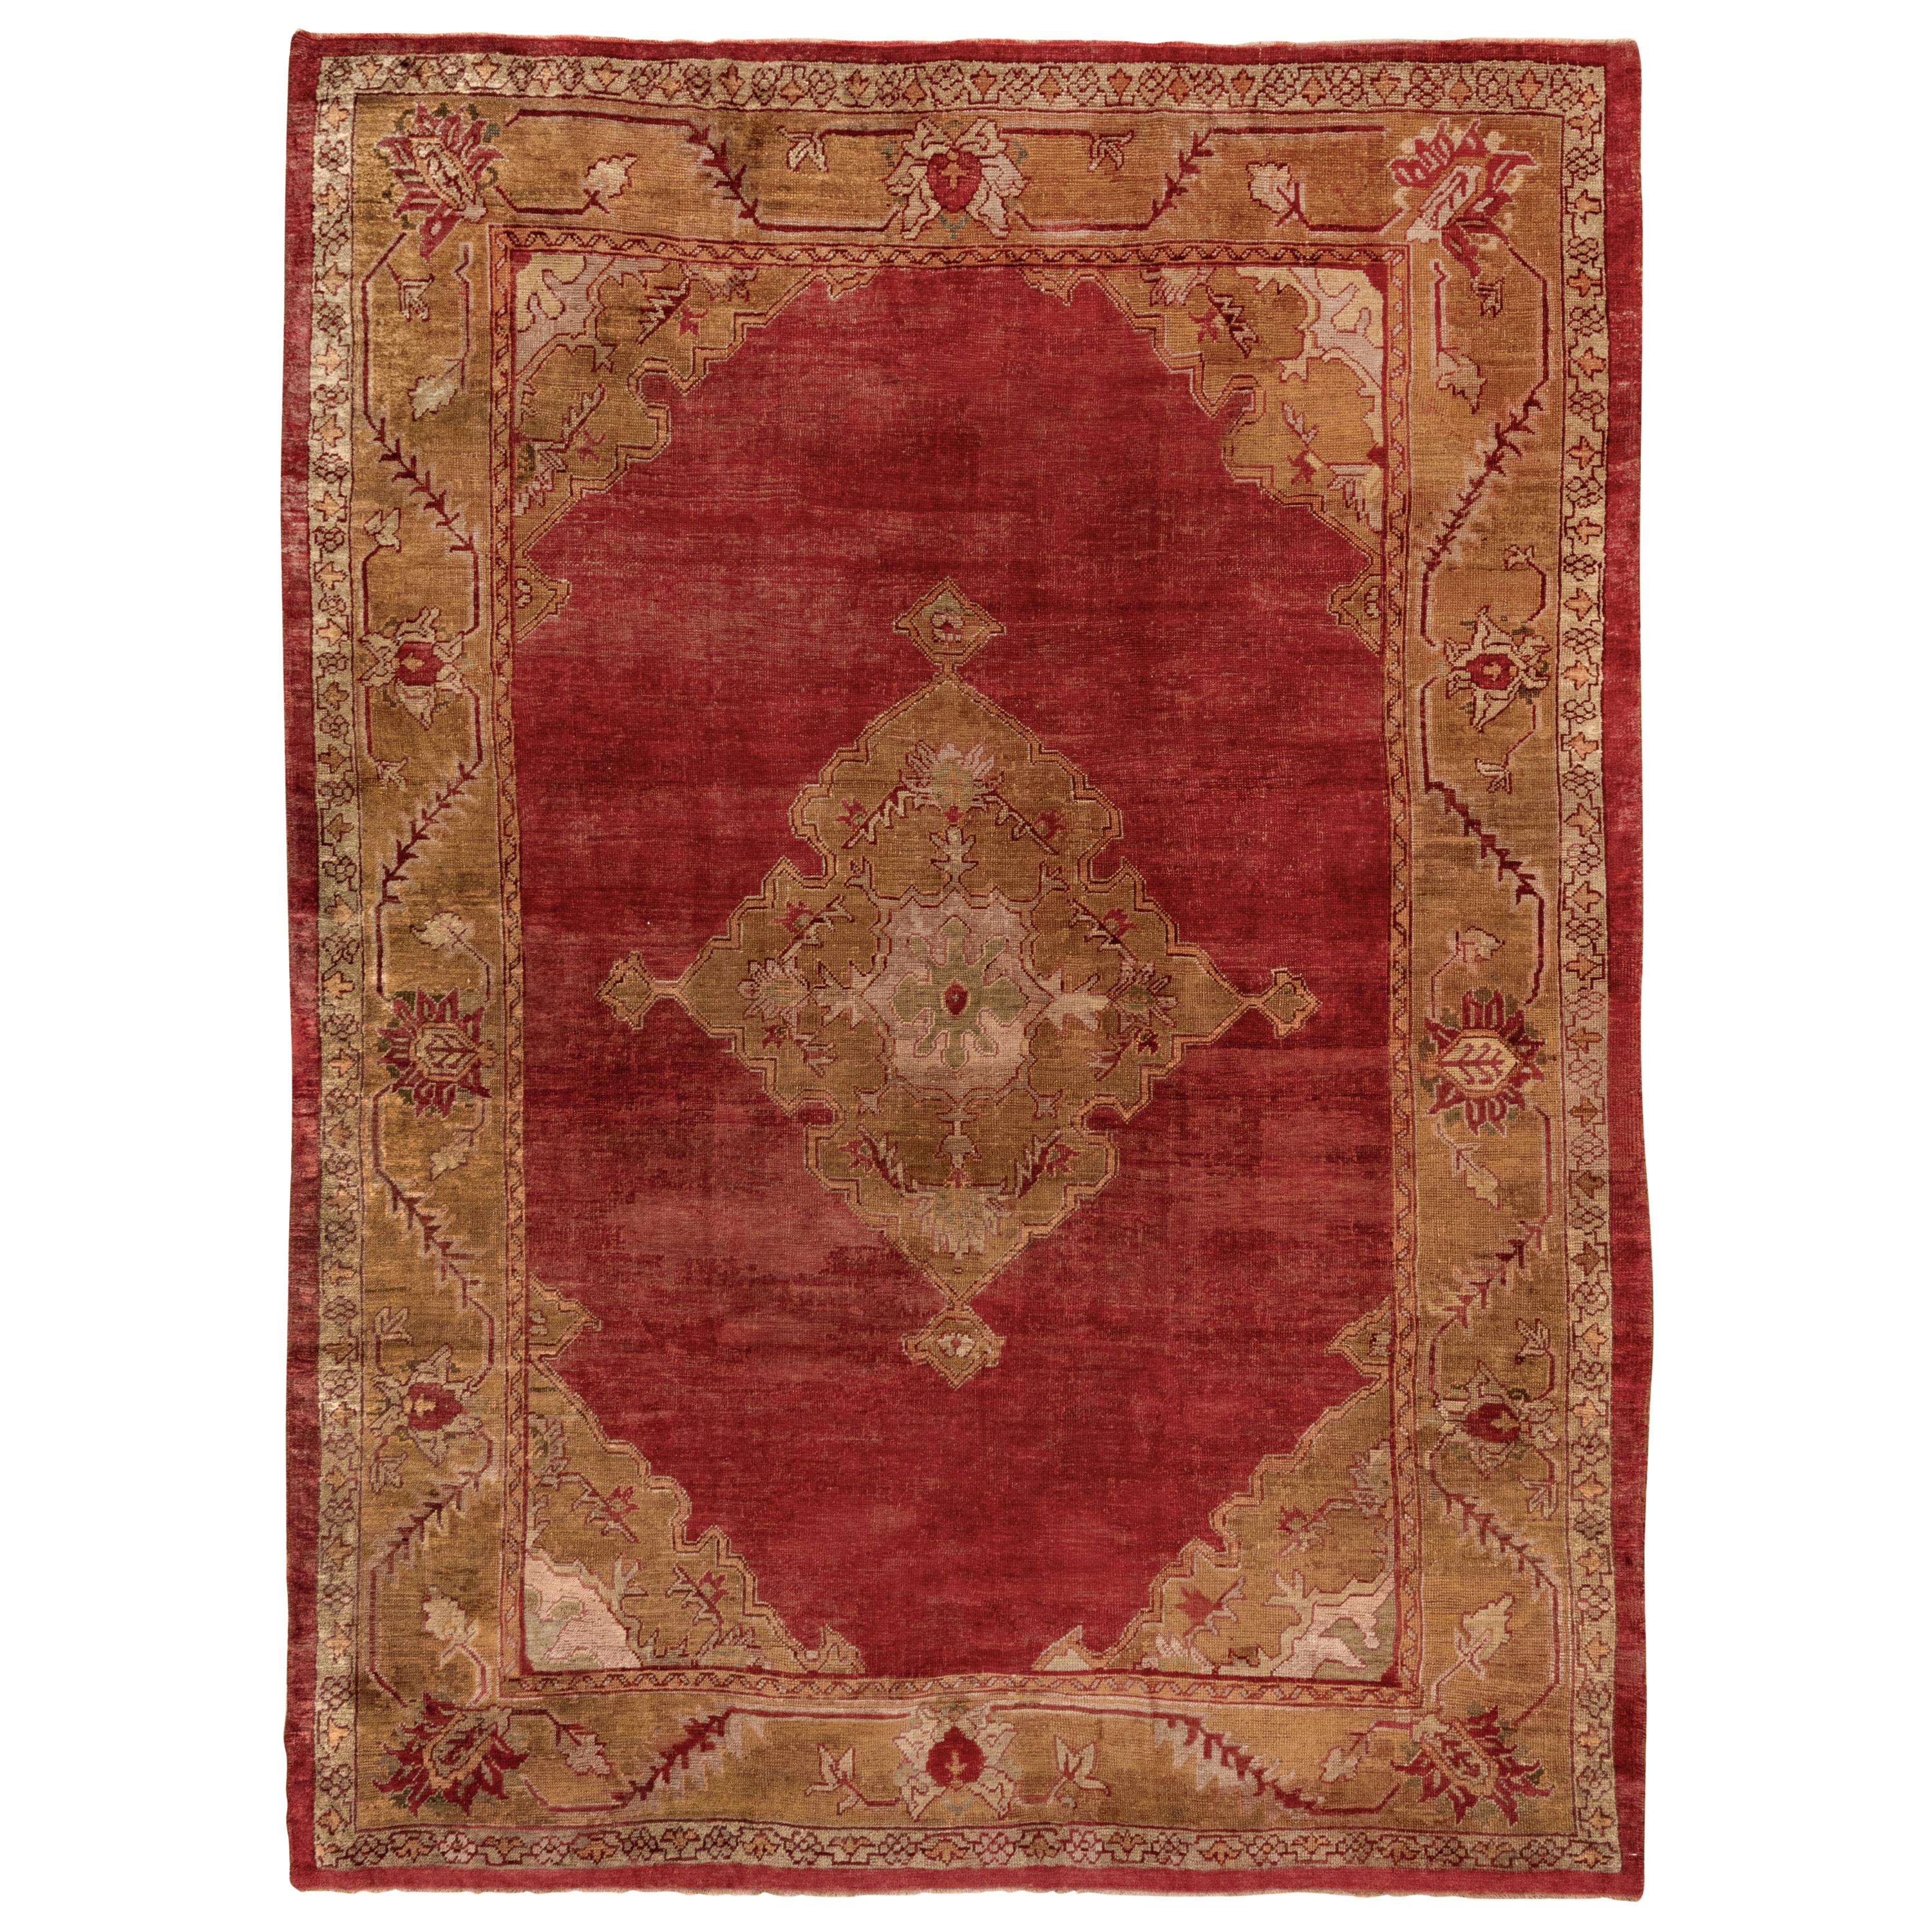 Antique Turkish Oushak Rug, Red Field and Gold Borders, Center Medallion For Sale